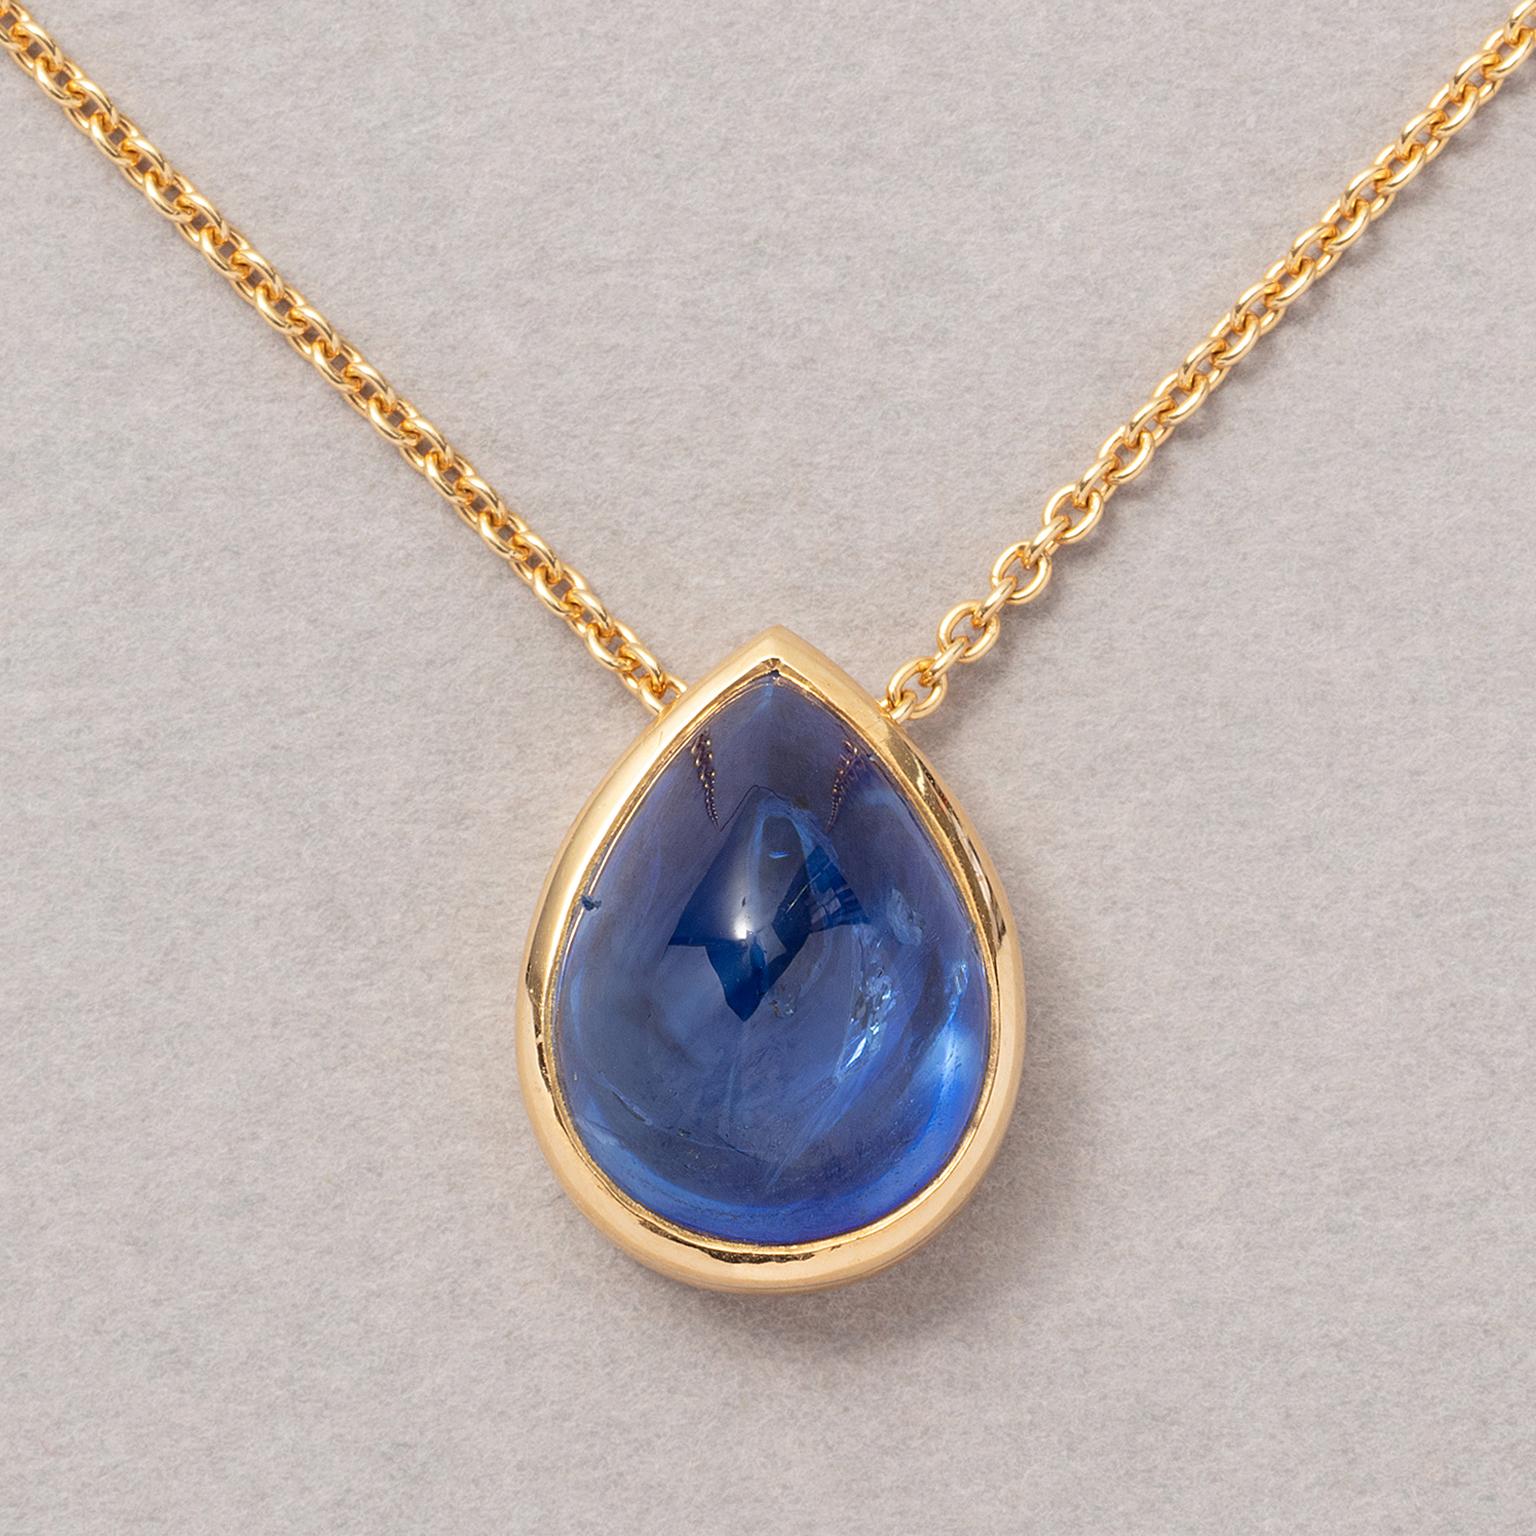 A teardrop-shaped, cabochon cut sapphire (Sri Lanka, app. 10.33 carats, 13.7 x 10.4 x 7.4 mm, certificate from Gem Paris) bezel set in 18 carat gold with a double border on a thin 18 carat gold anchor chain.

weight: 7.43 grams
length: 40 - 42